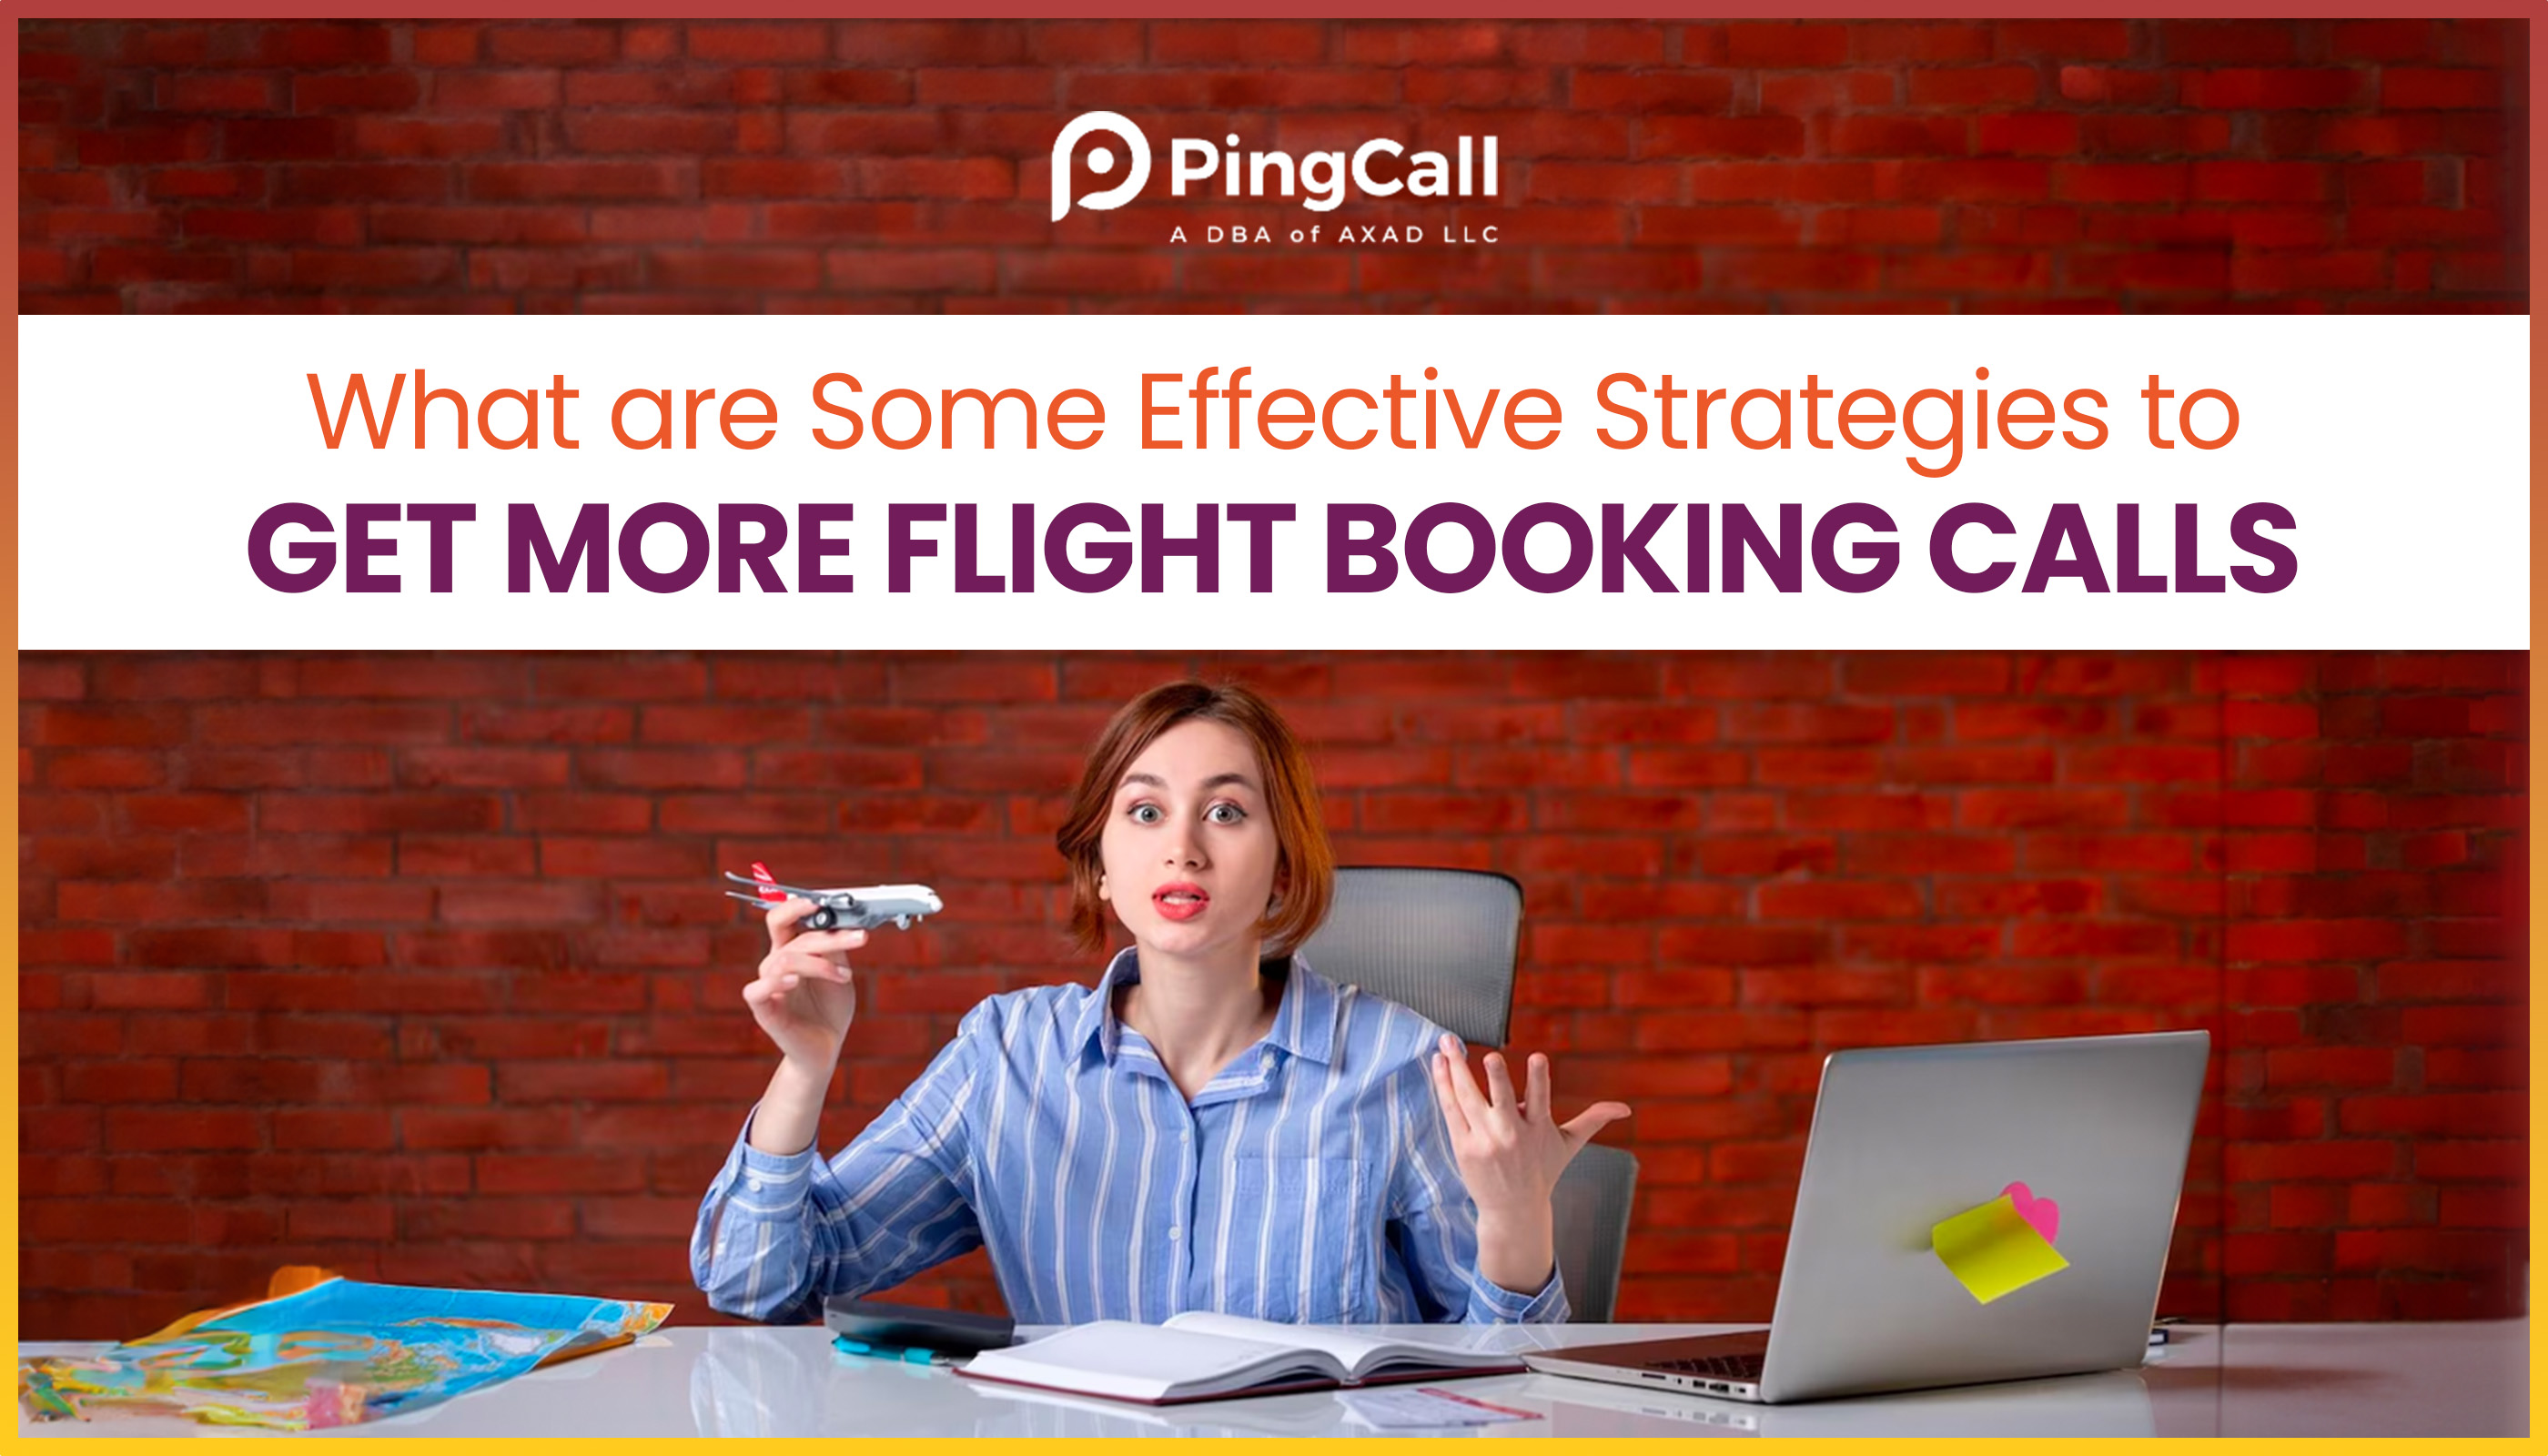 What are Some Effective Strategies to Get More Flight Booking Calls?